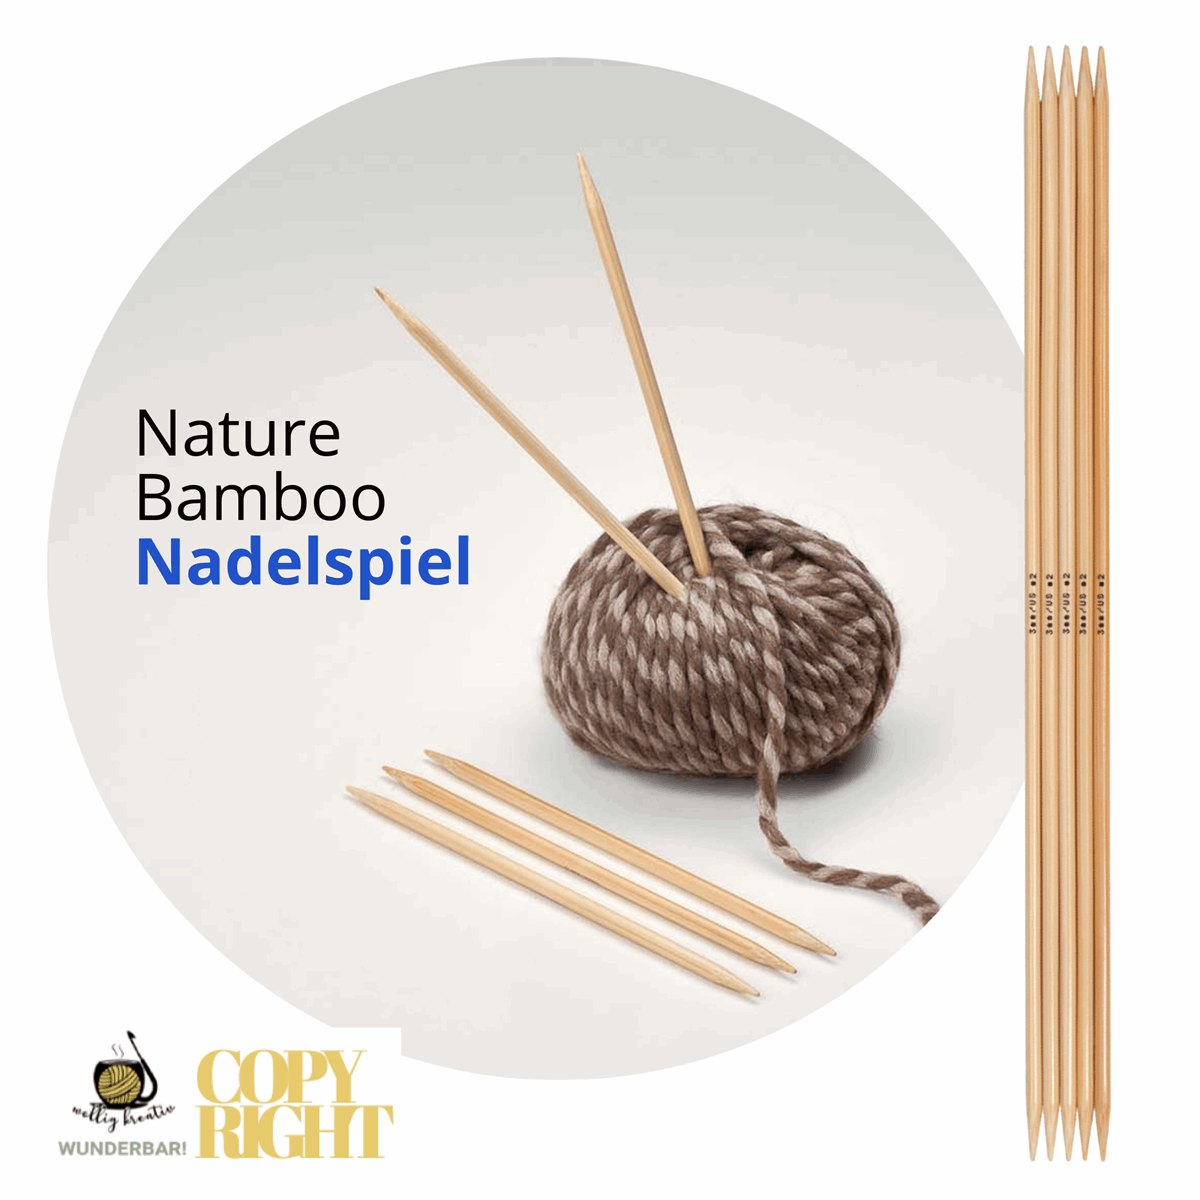 Addi, Nature Bamboo double pointed needles, 65012, size 5 length 20 cm